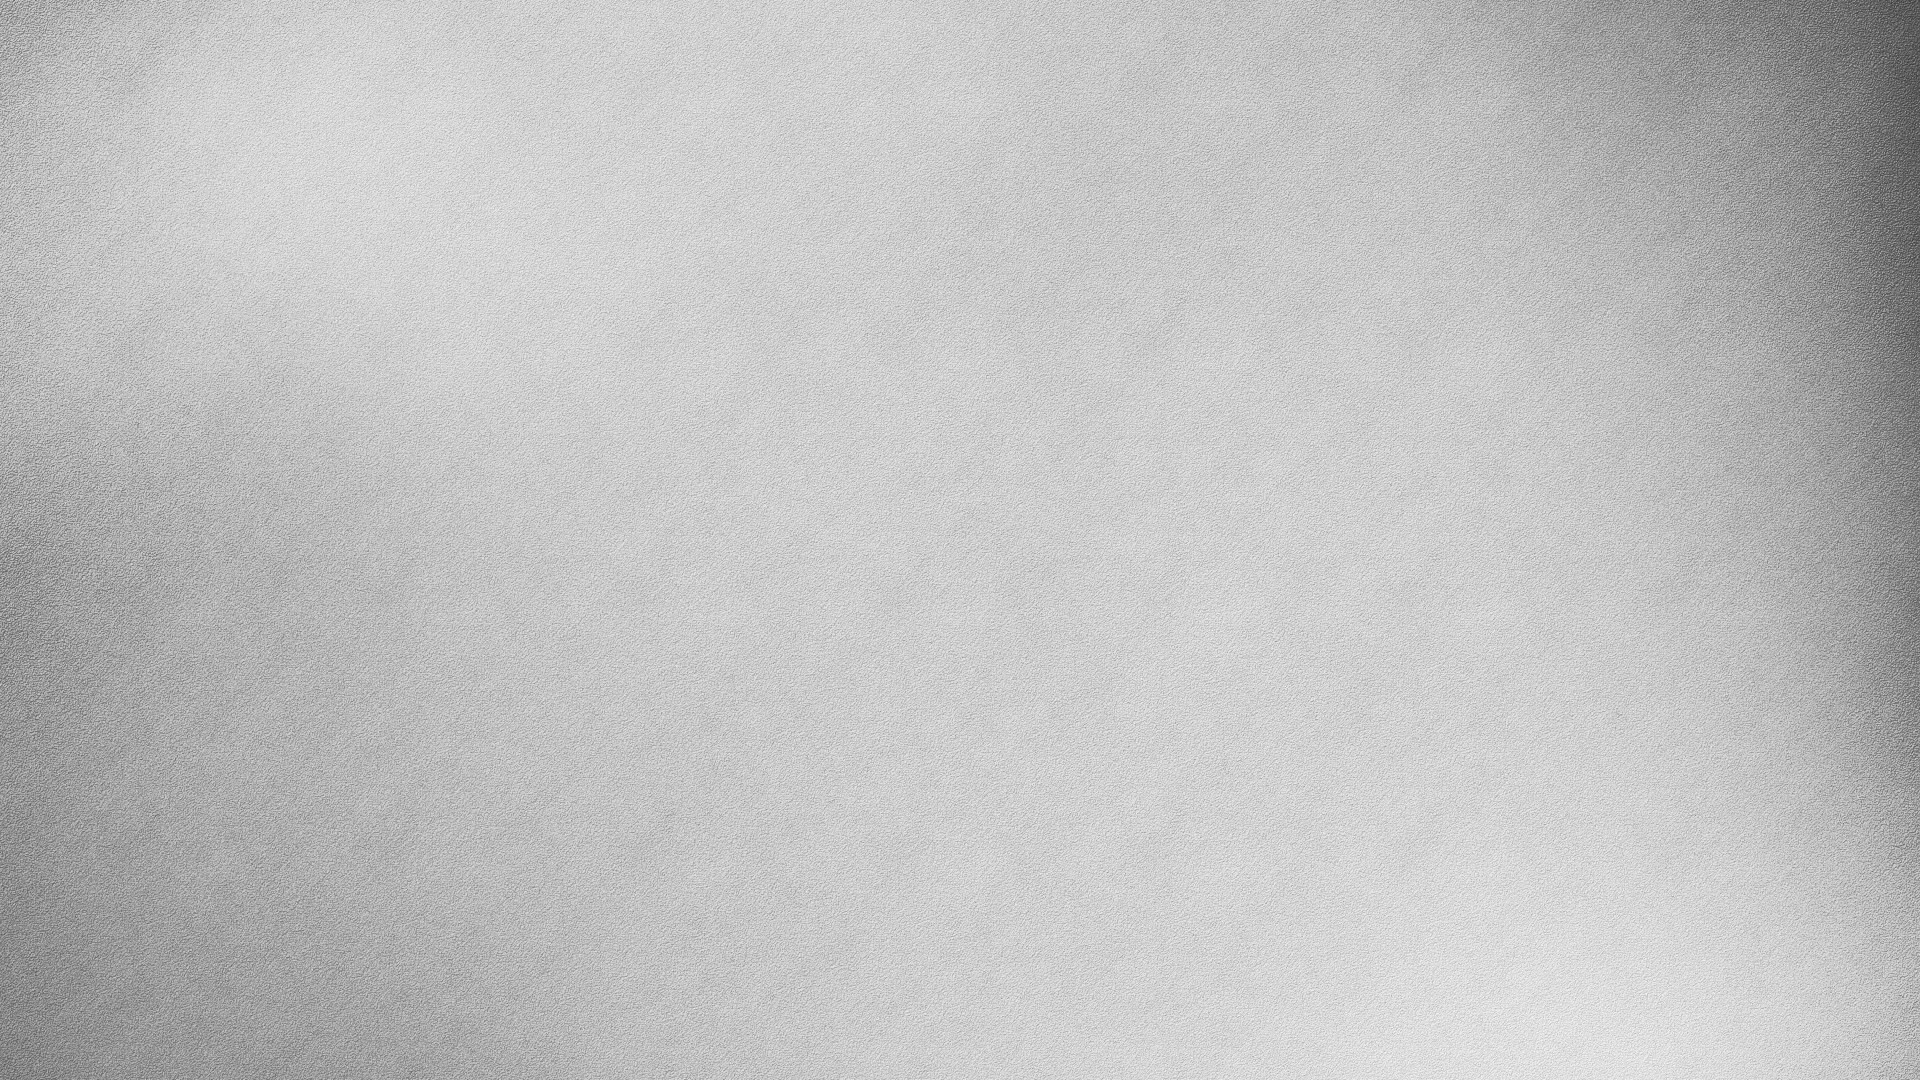 abstract, Minimalistic, Textures, Grayscale, Digital, Art, Backgrounds Wallpaper